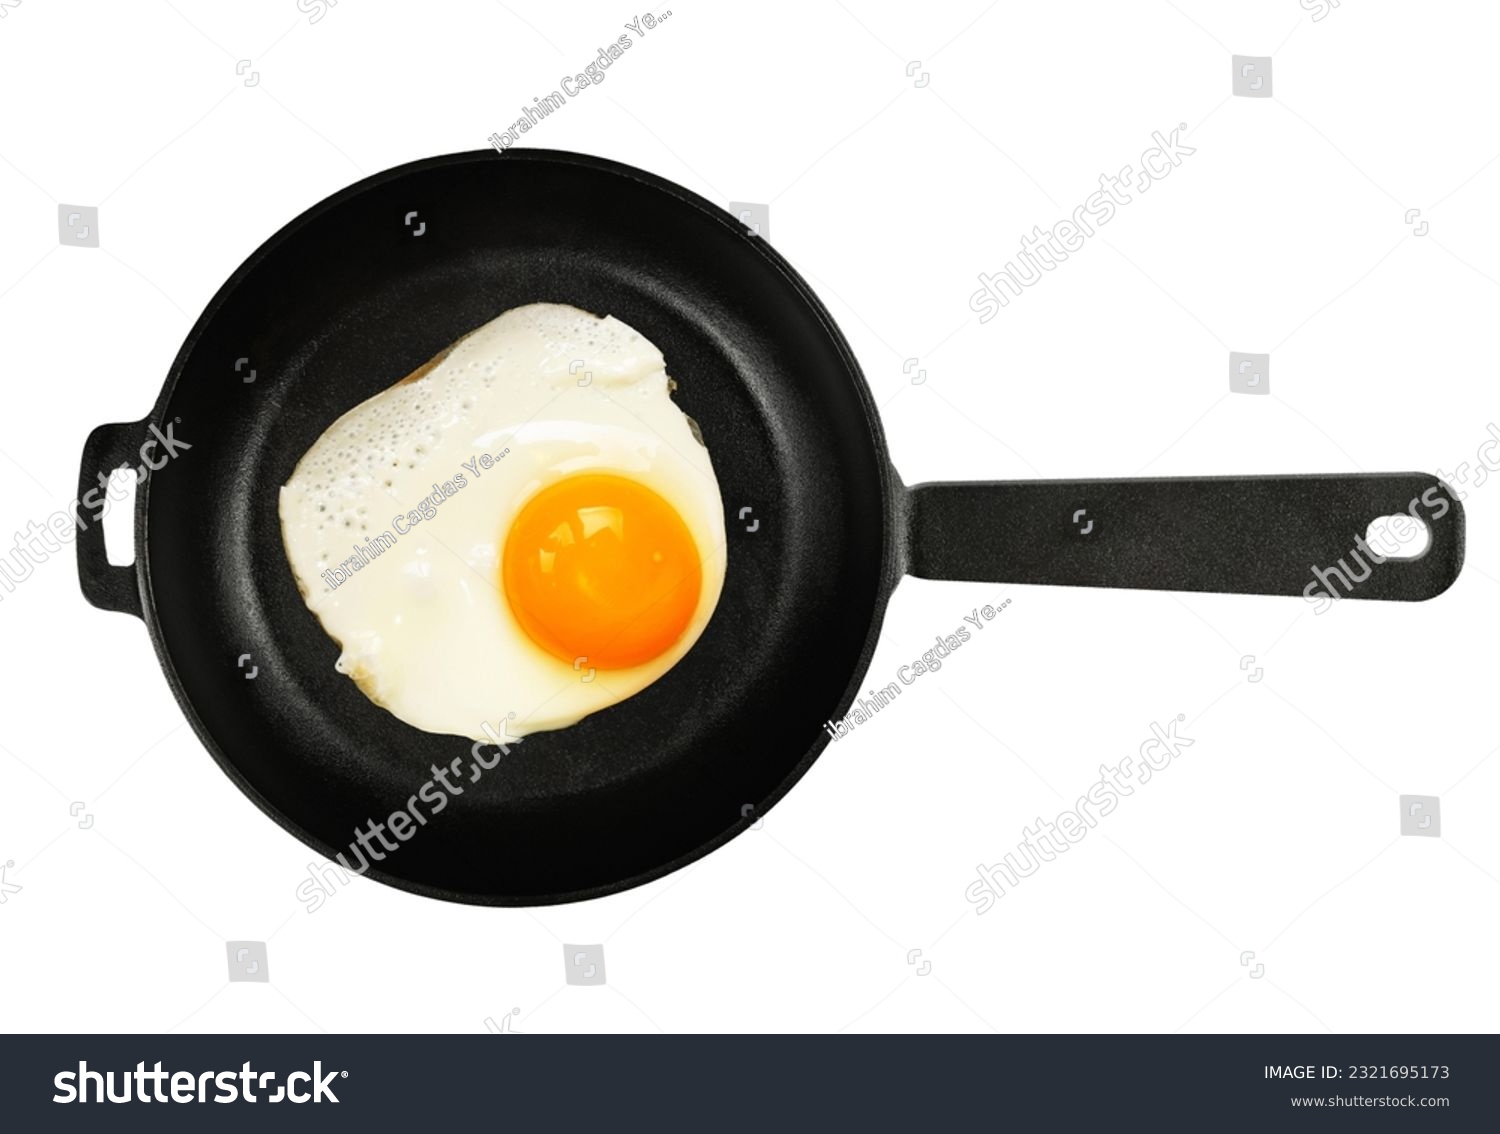 Frying pan isolated on white background #2321695173